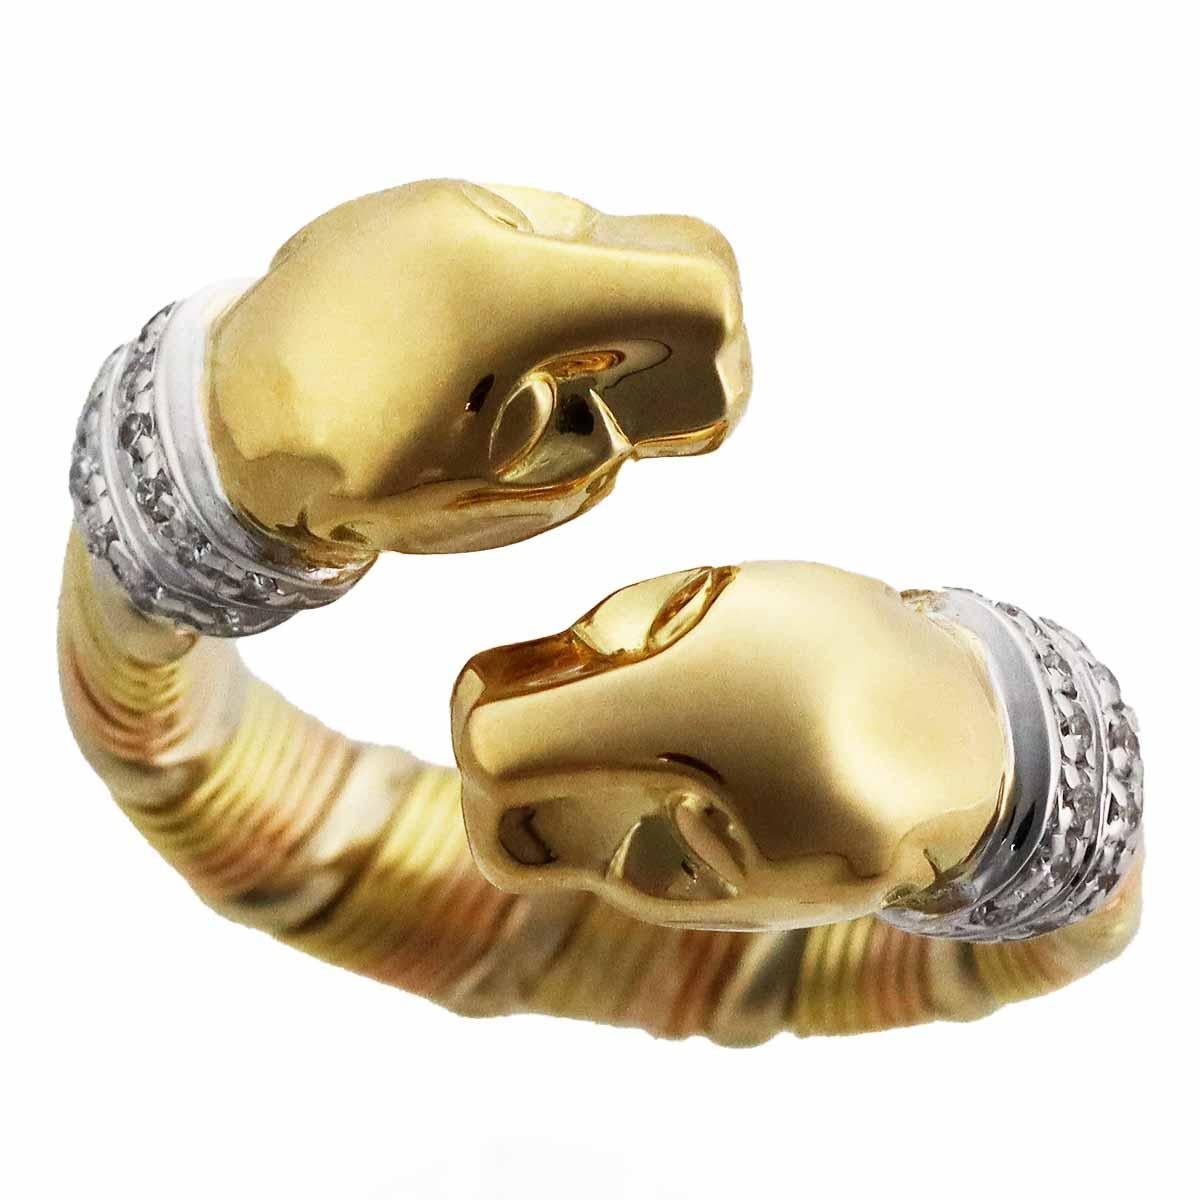 Brand:Cartier
Name:Cougar Ring
Material :Diamond,750 K18/ YG WG PG
Yellow Gold White Gold Pink Gold
Comes with:Cartier Case,Cartier repair certificate (Sep 2018)
Ring size:British & Australian:H 1/2  /   US & Canada:4 /  French & Russian:47 / 